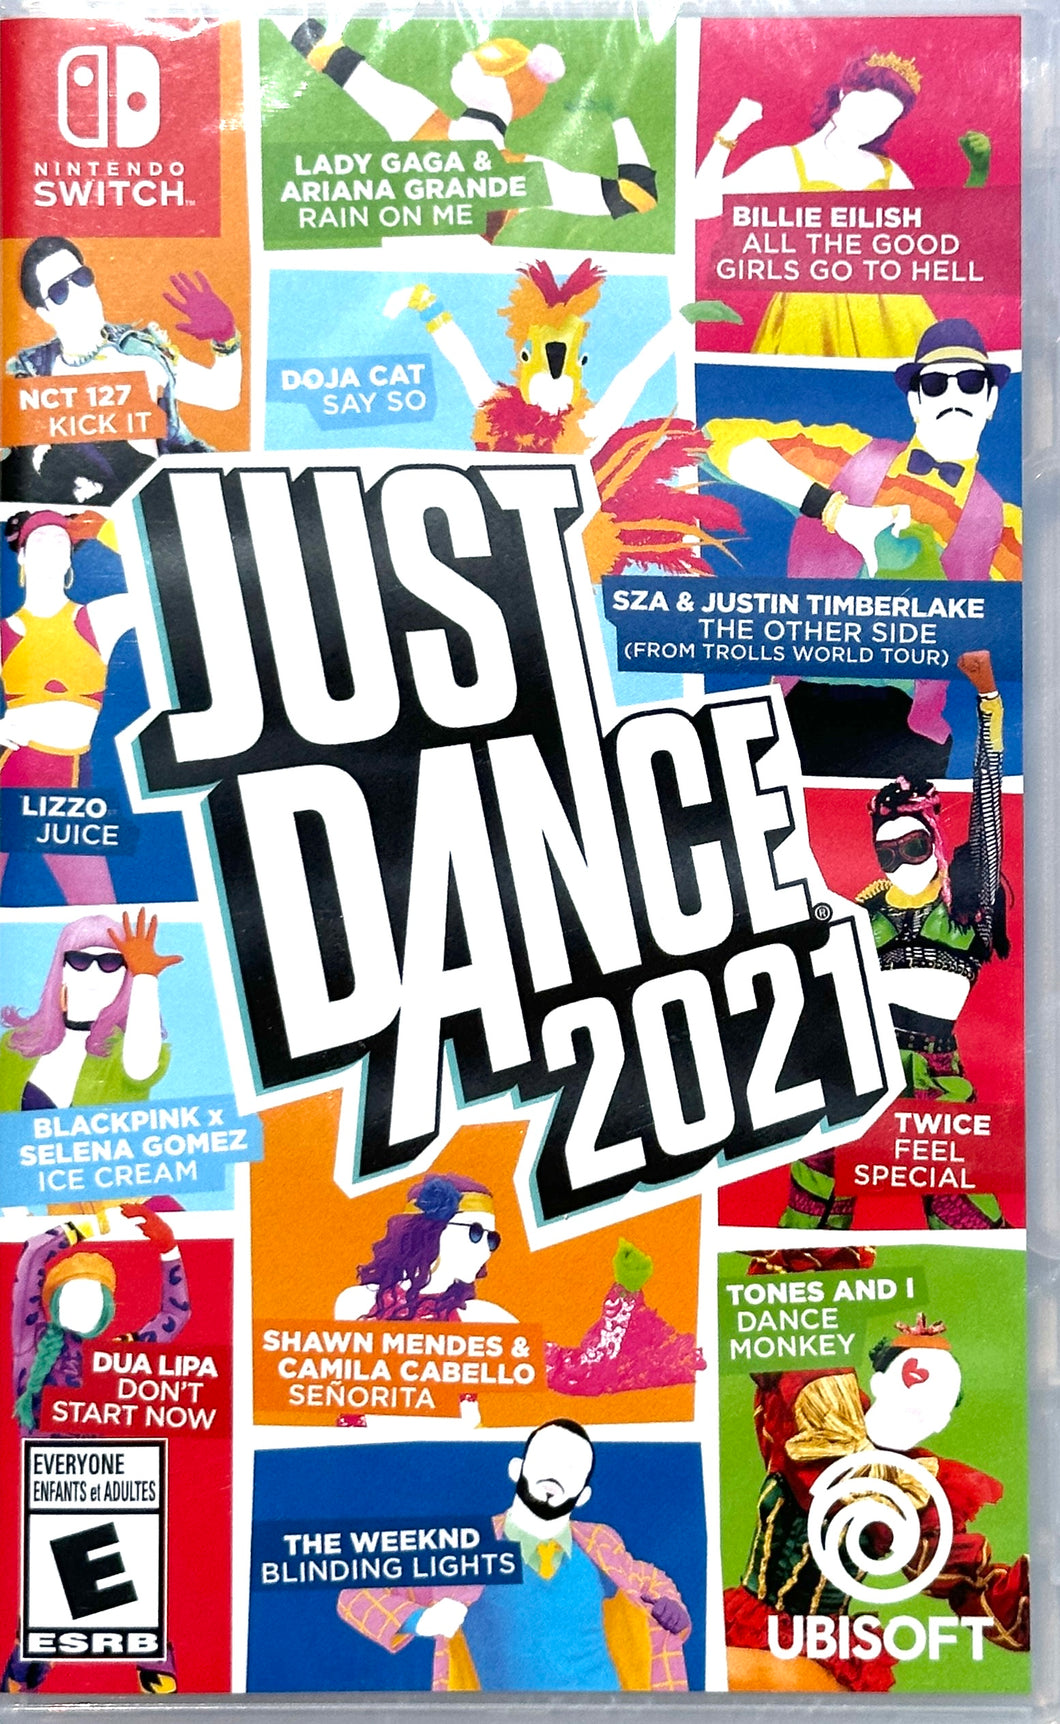 Just Dance 2021 for Nintendo Switch